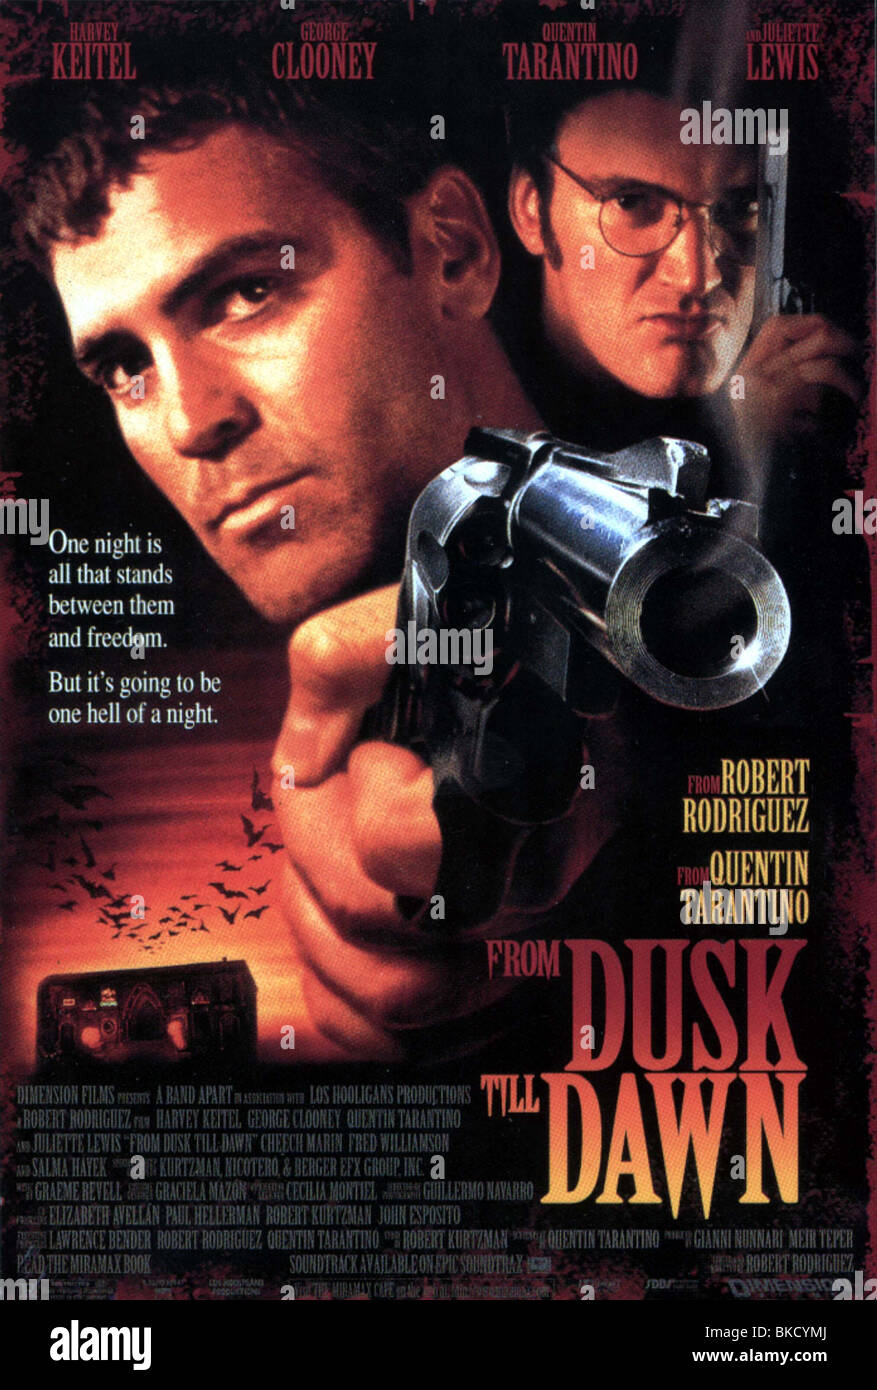 FROM DUSK TILL DAWN (1996) GEORGE CLOONEY, QUENTIN TARANTINO POSTER FDTD 001 PC Stock Photo